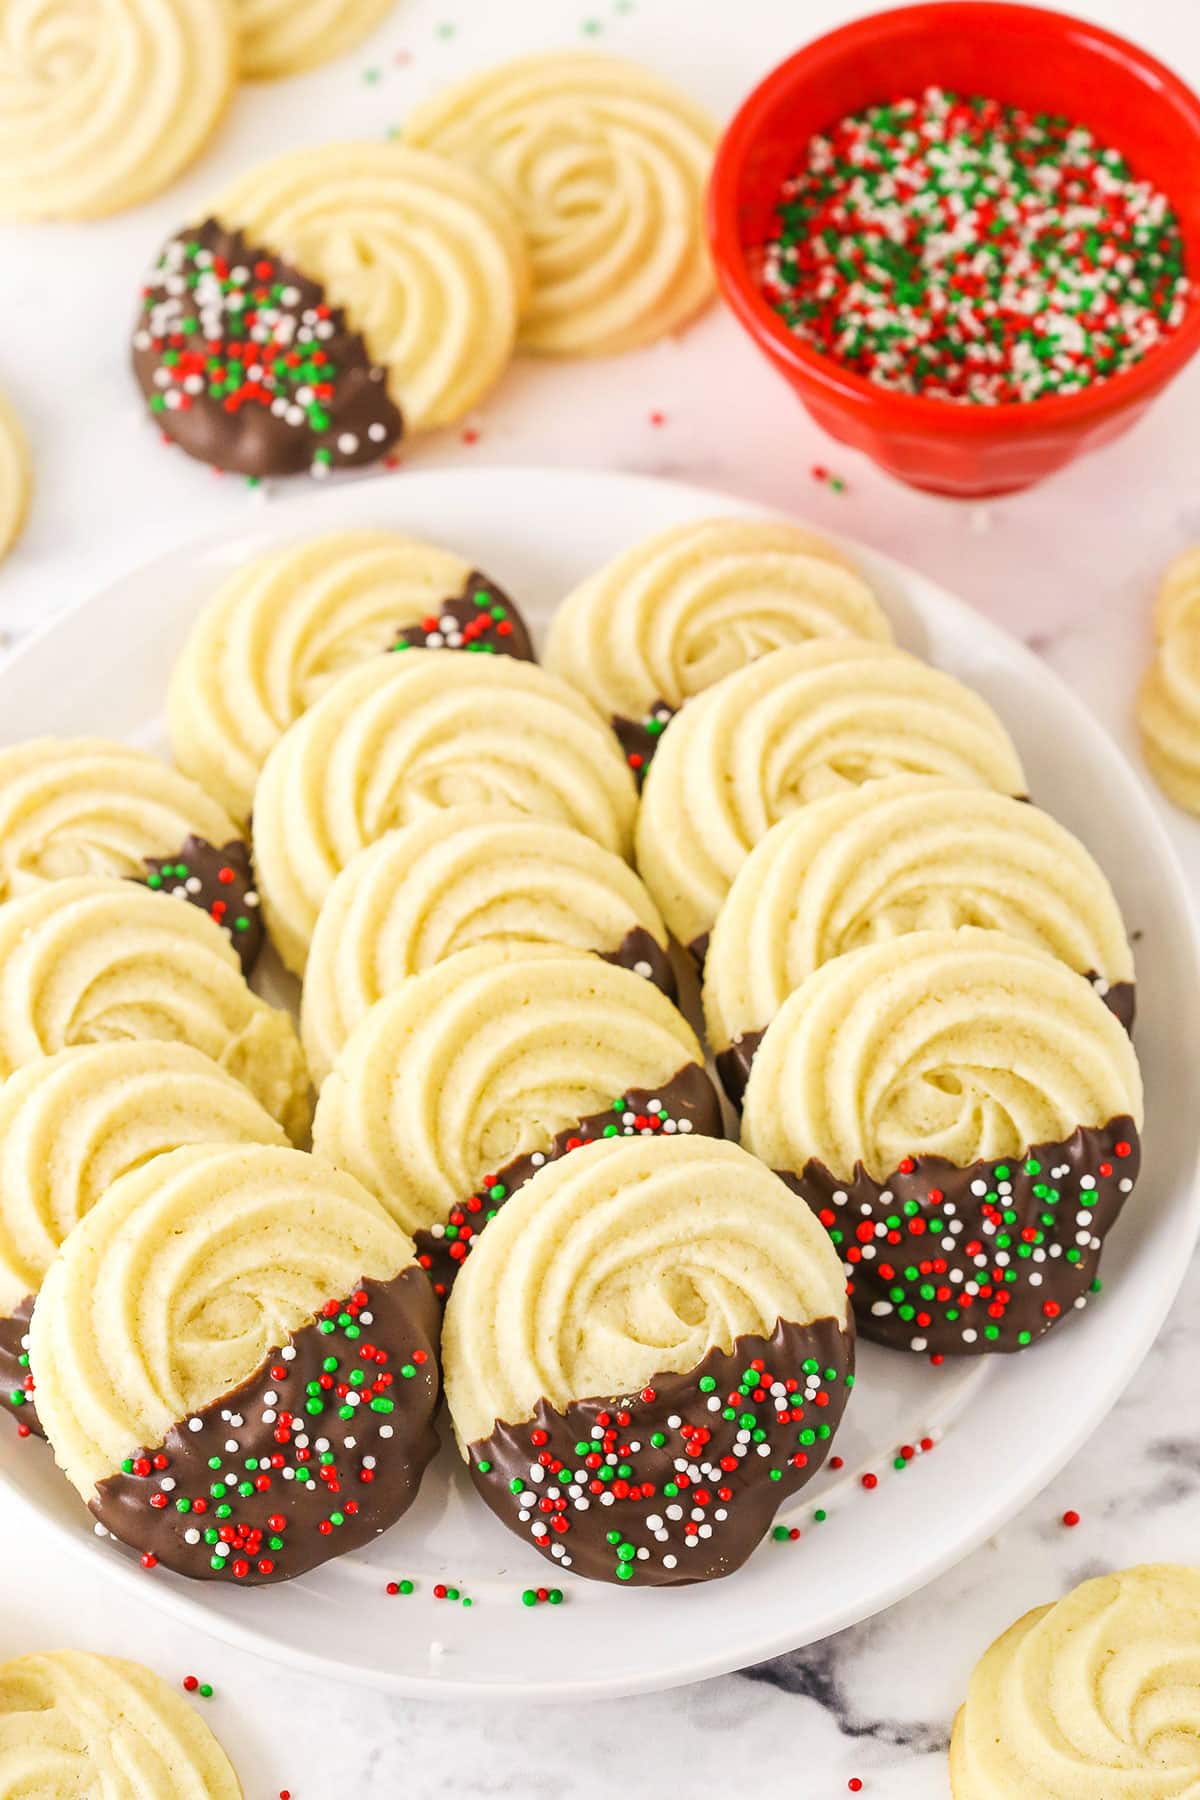 Butter cookies lined up on a plate beside a bowl of sprinkles.